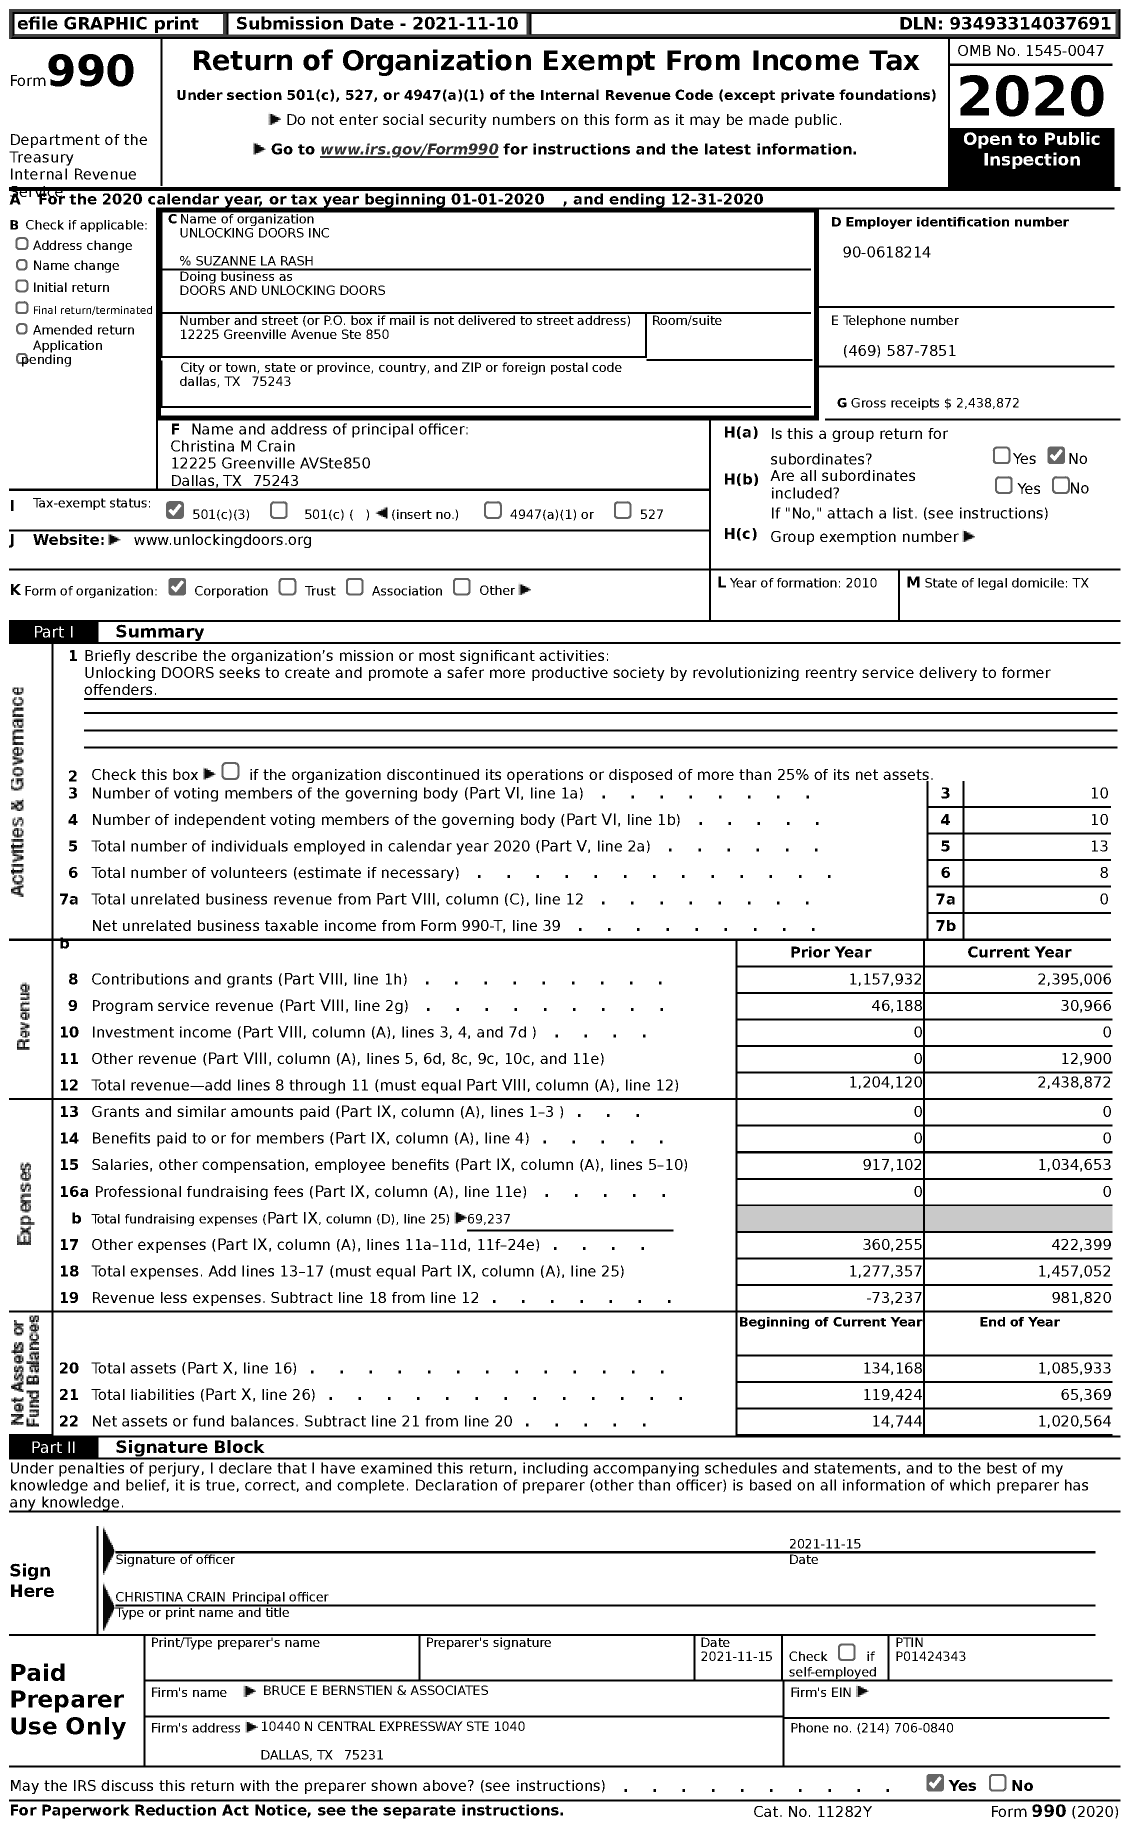 Image of first page of 2020 Form 990 for DOORS and Unlocking DOORS